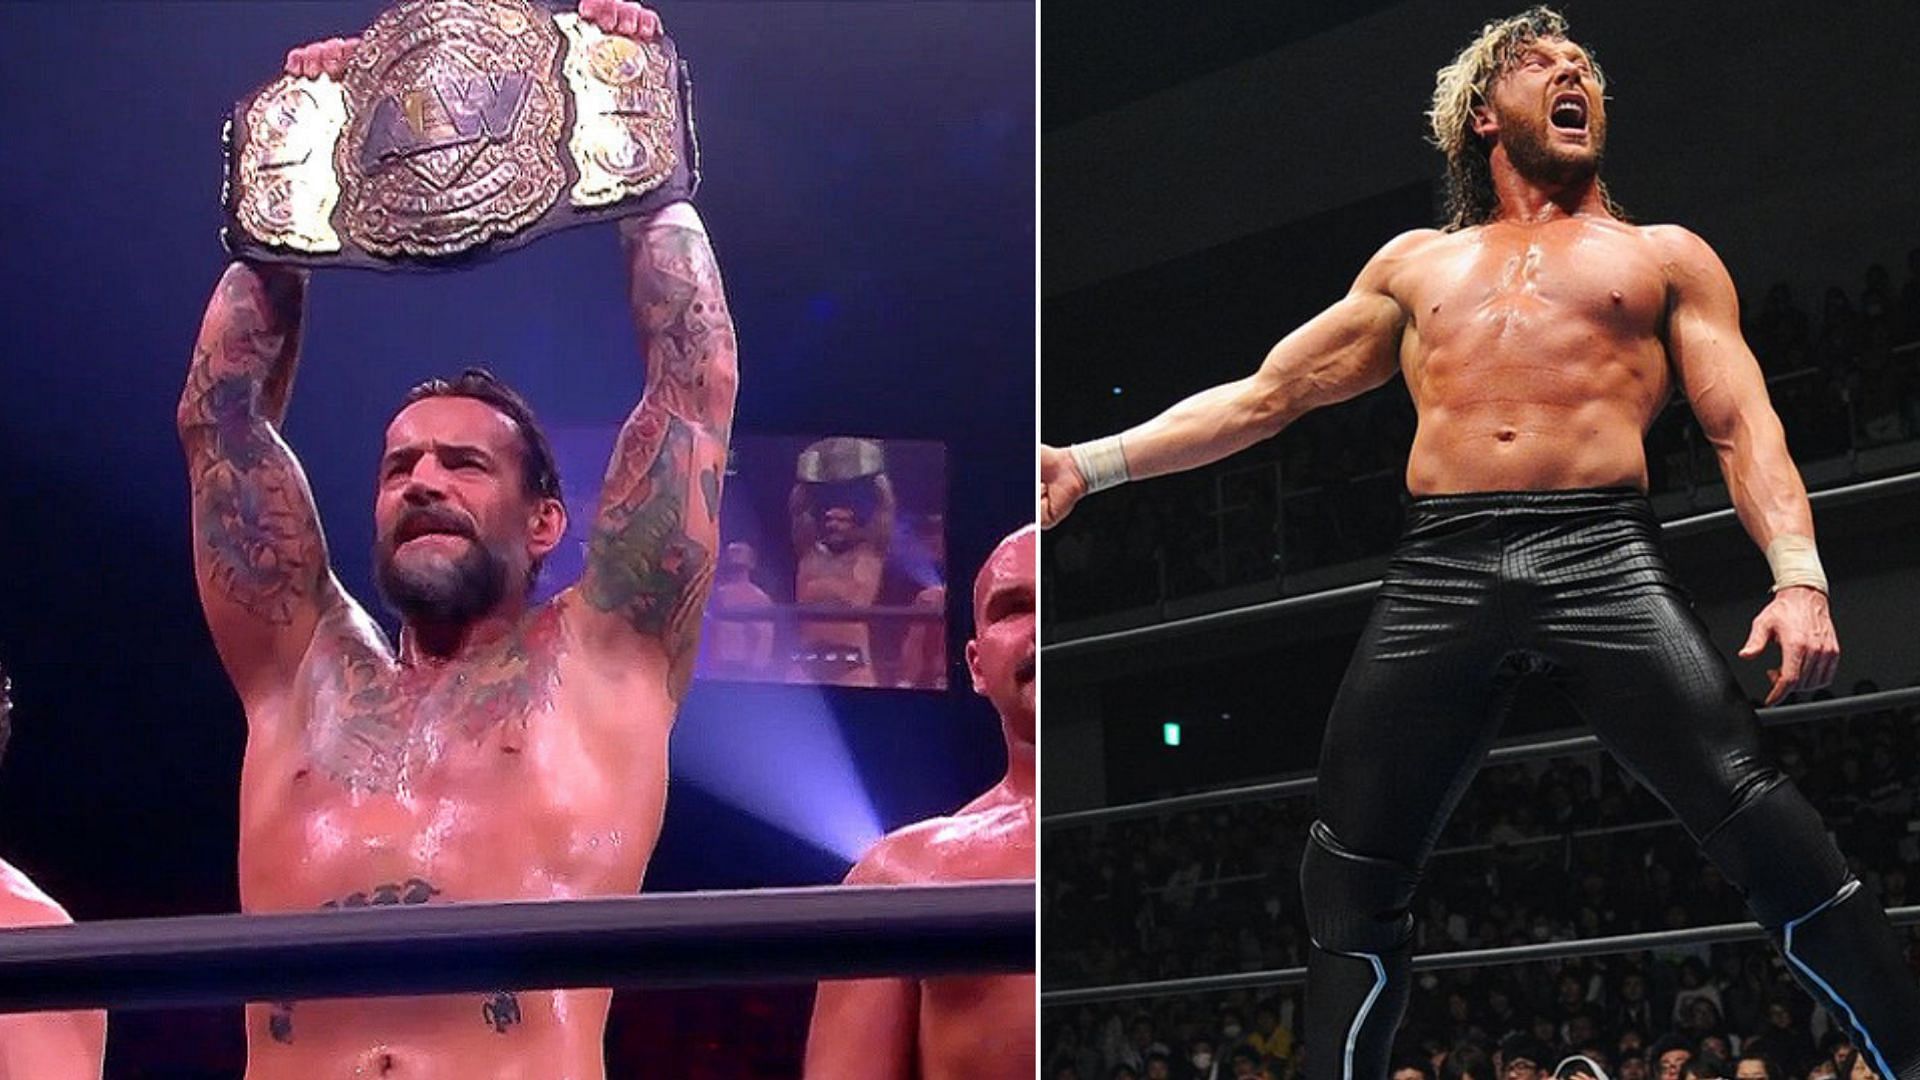 CM Punk looks set to defend his title against an NJPW invader